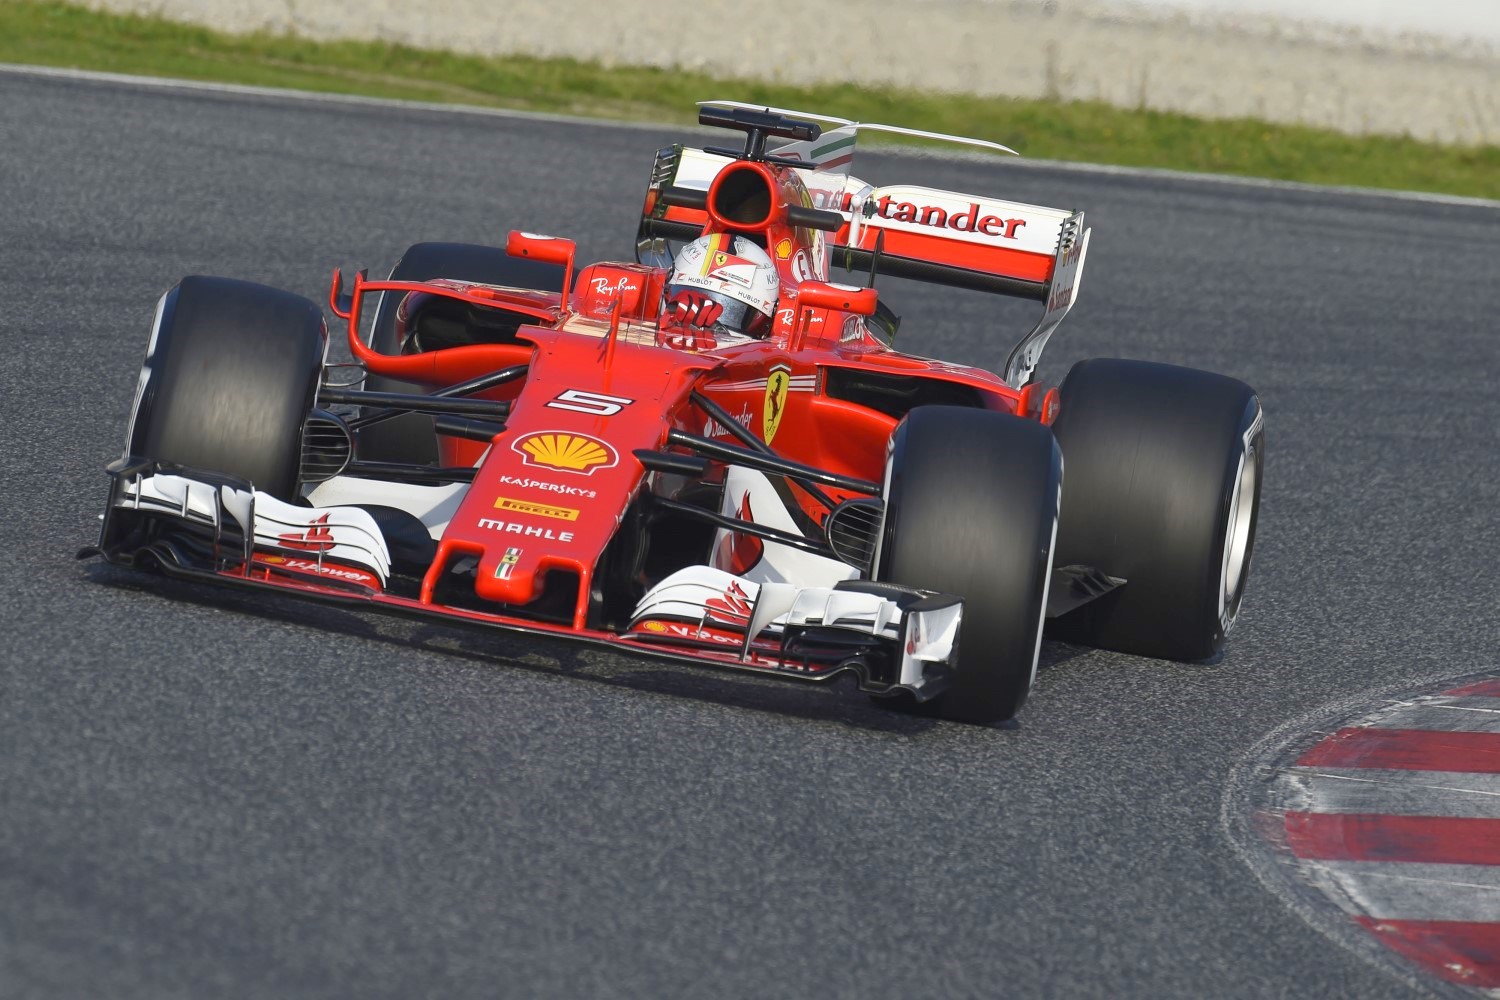 If this rumor is true, will Ferrari now have the advantage?